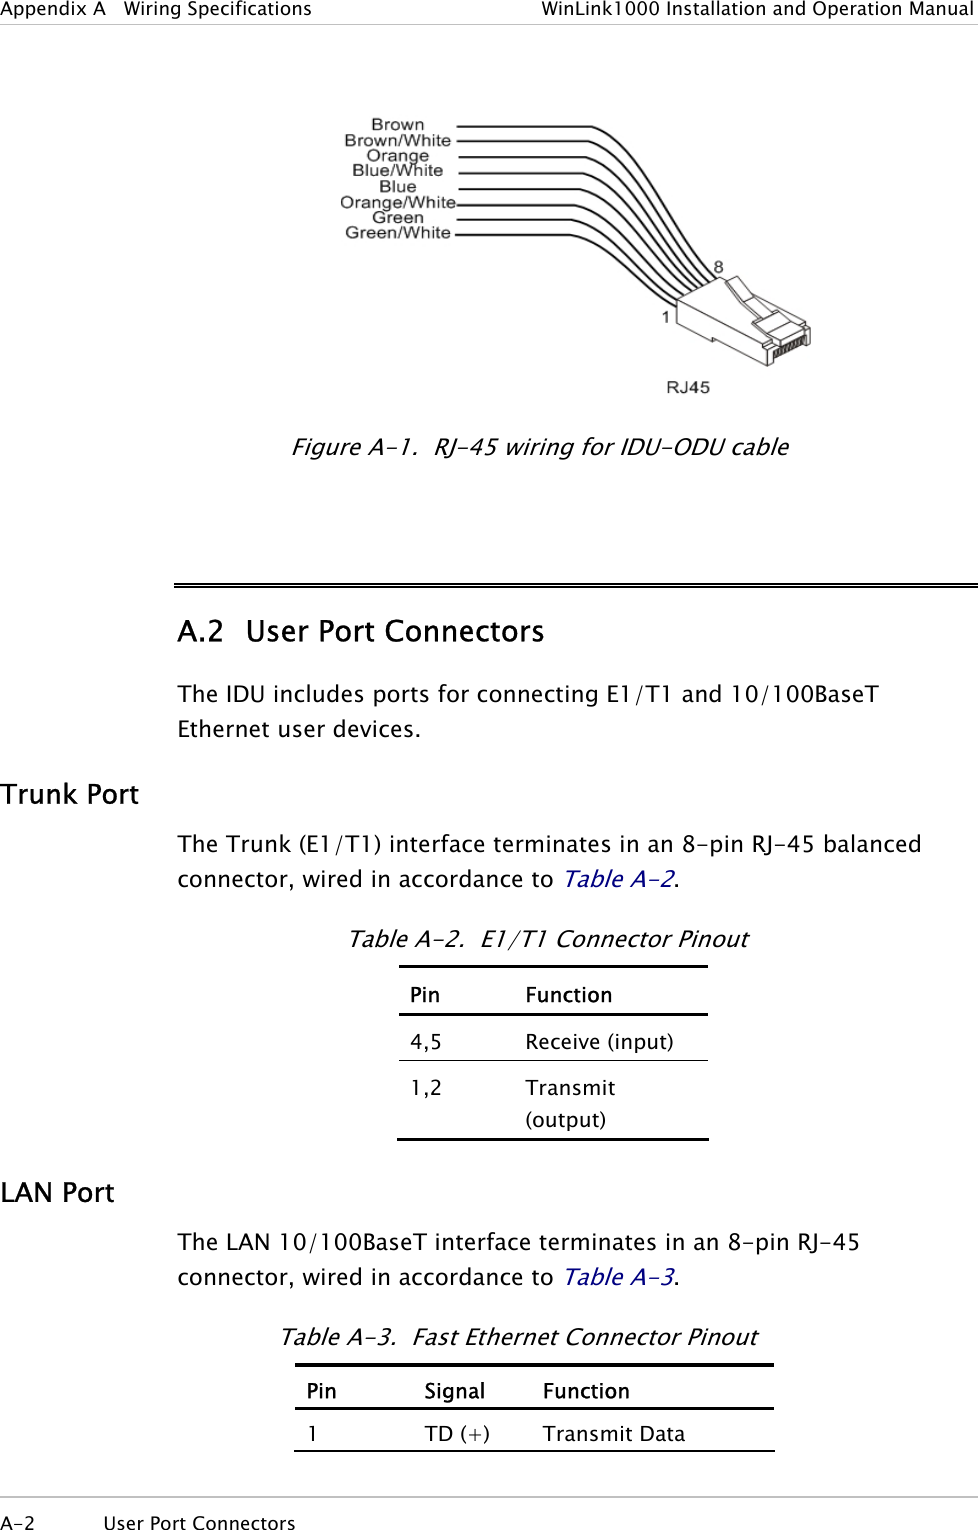 Appendix A   Wiring Specifications  WinLink1000 Installation and Operation Manual    Figure  A-1.  RJ-45 wiring for IDU-ODU cable  A.2  User Port Connectors The IDU includes ports for connecting E1/T1 and 10/100BaseT Ethernet user devices. Trunk Port The Trunk (E1/T1) interface terminates in an 8-pin RJ-45 balanced connector, wired in accordance to Table  A-2. Table  A-2.  E1/T1 Connector Pinout Pin   Function 4,5 Receive (input) 1,2 Transmit (output) LAN Port The LAN 10/100BaseT interface terminates in an 8-pin RJ-45 connector, wired in accordance to Table  A-3. Table  A-3.  Fast Ethernet Connector Pinout Pin Signal Function 1  TD (+)  Transmit Data A-2  User Port Connectors   